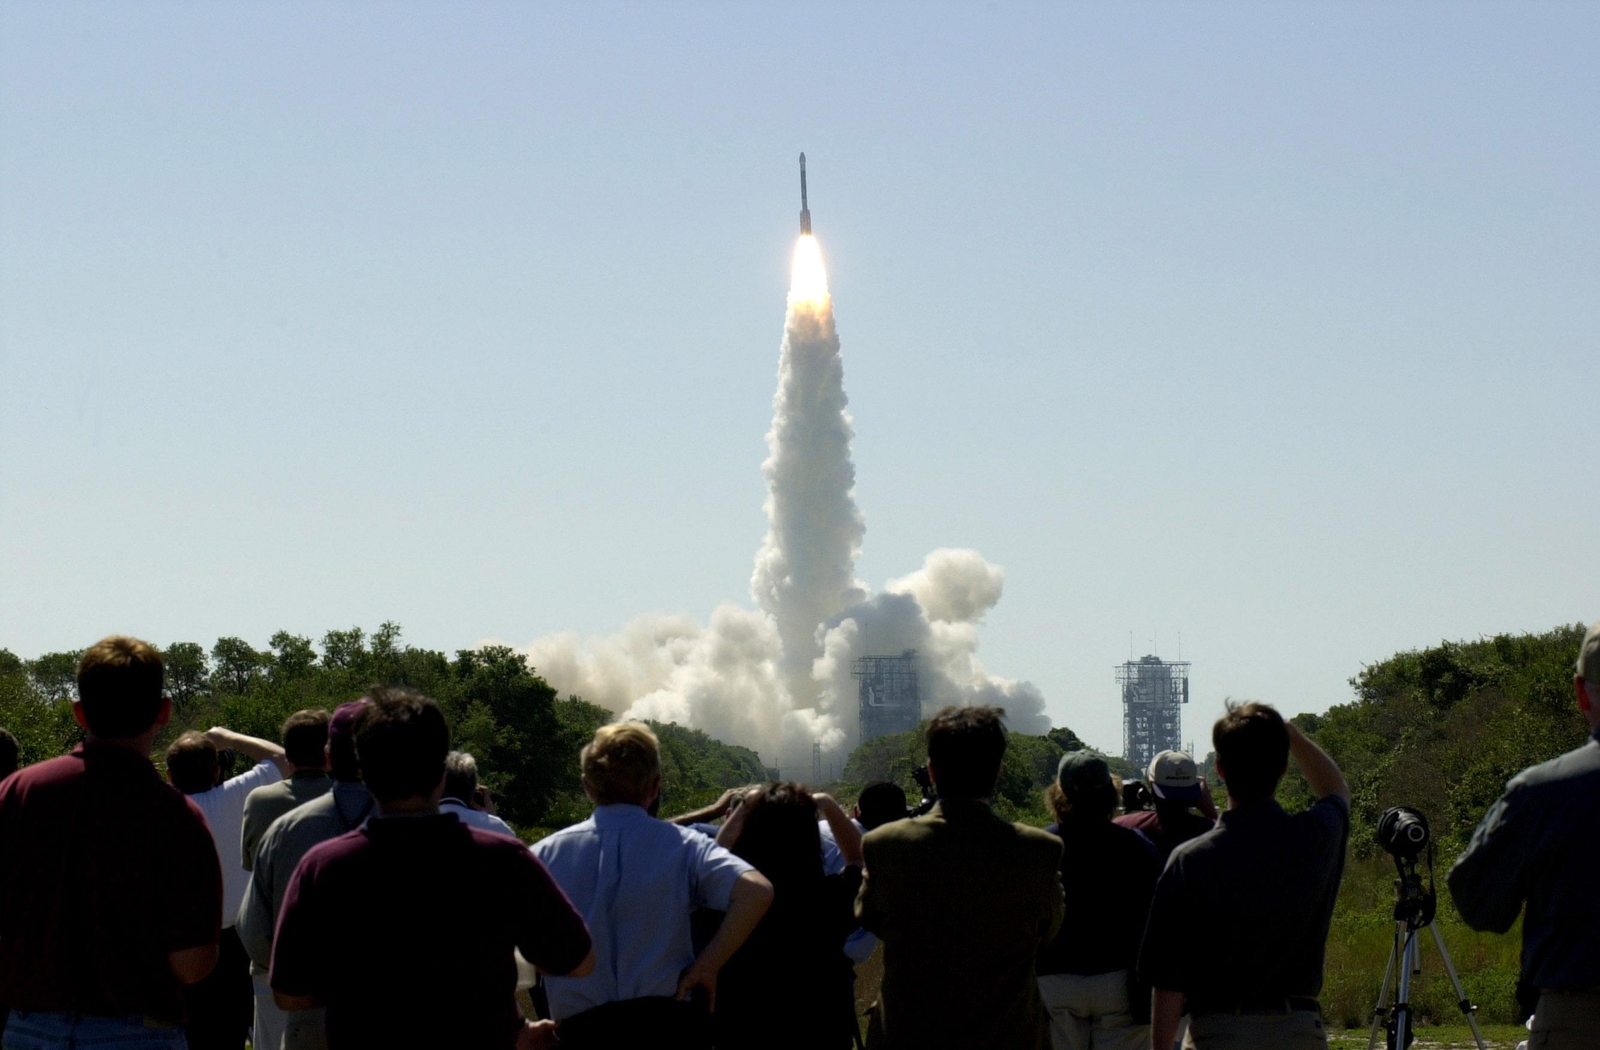 Odyssey's Launch to Mars on April 7, 2001